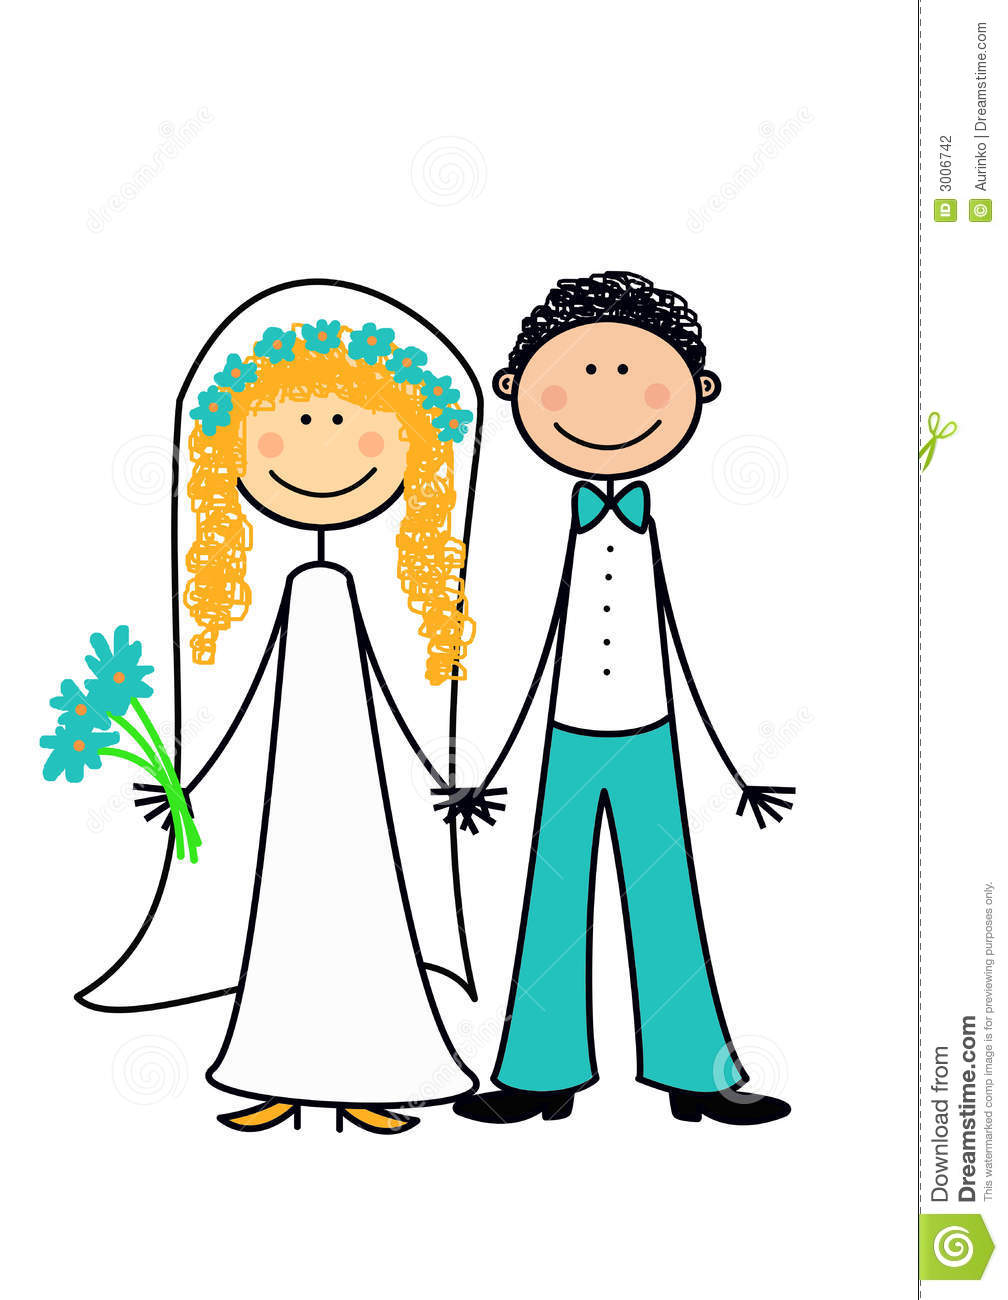 clipart on marriage - photo #7